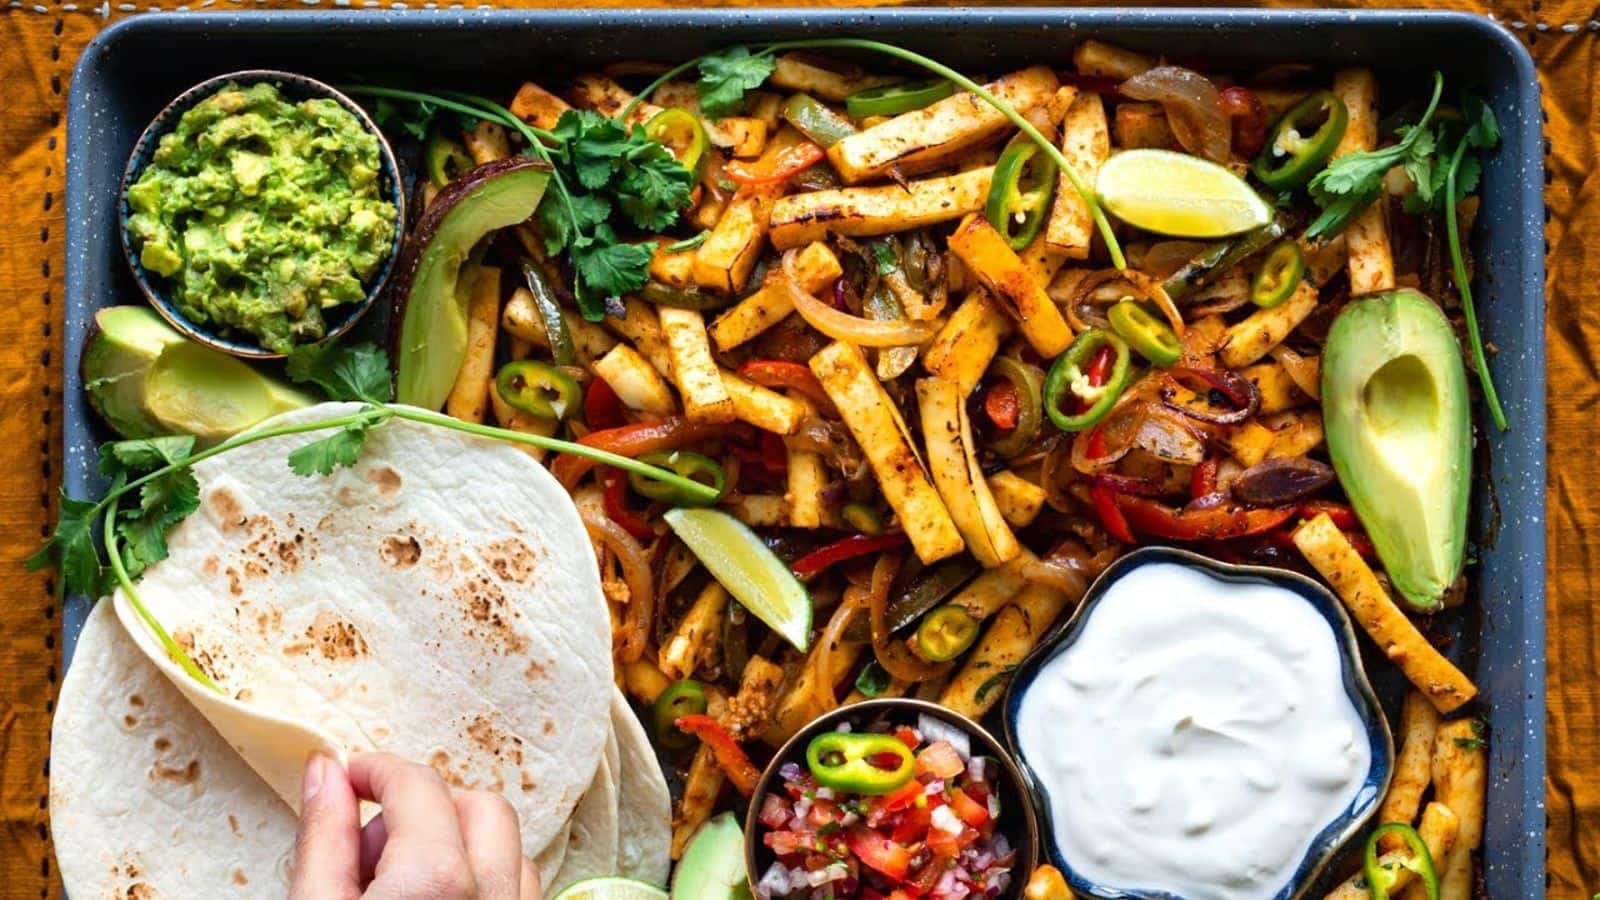 Make Sizzling Mexican tofu fajitas with this recipe